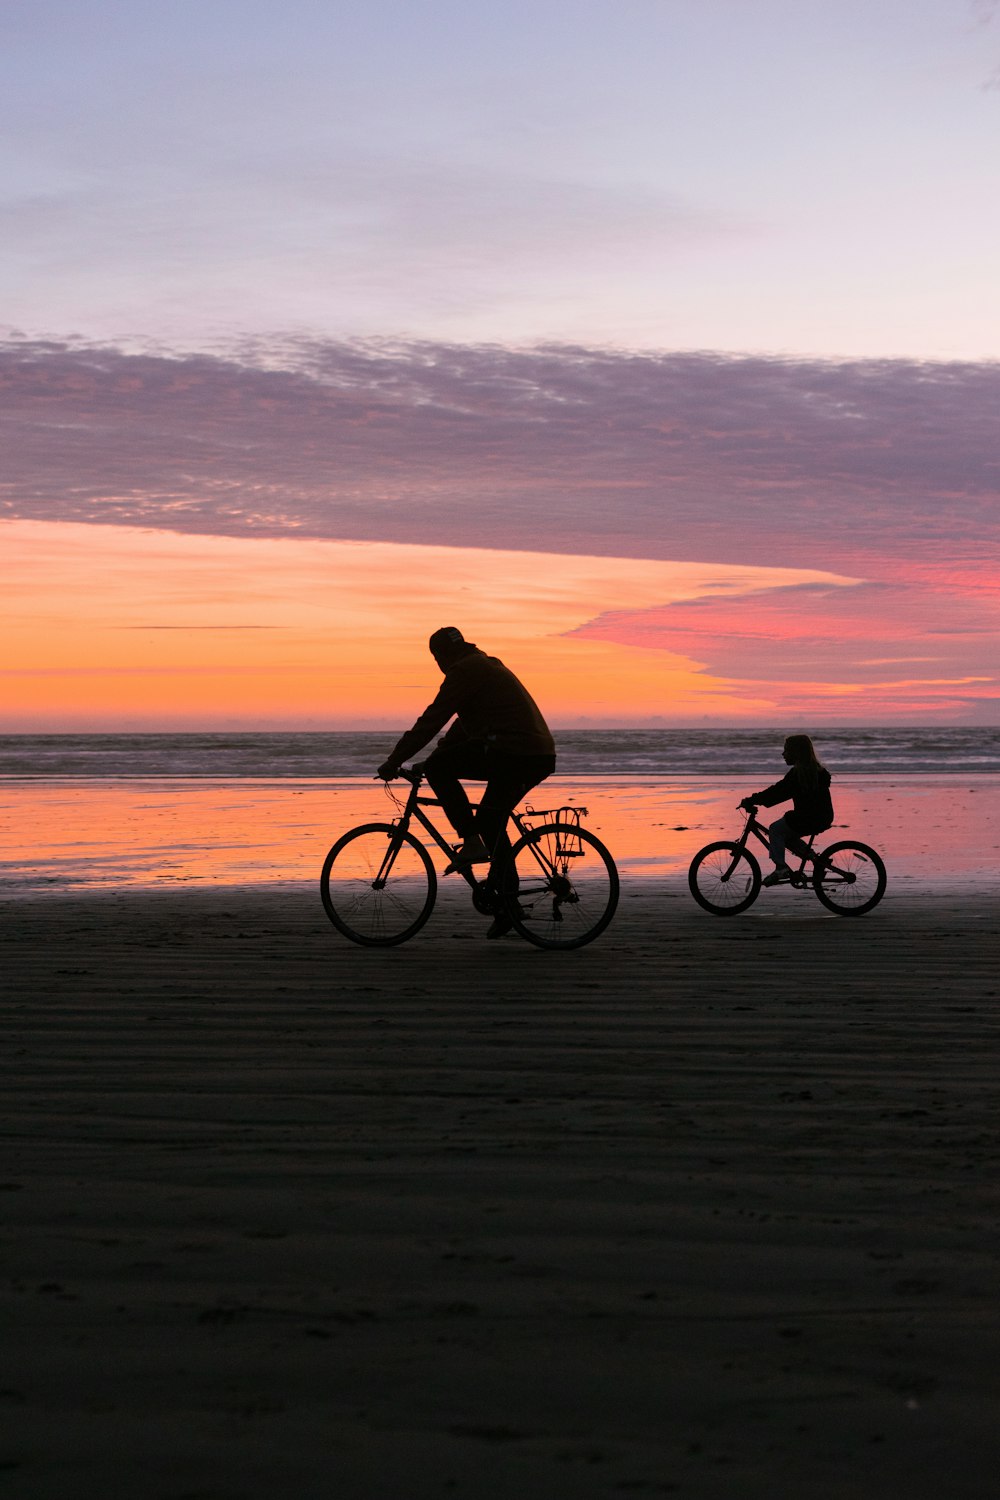 a group of people riding bikes on a beach